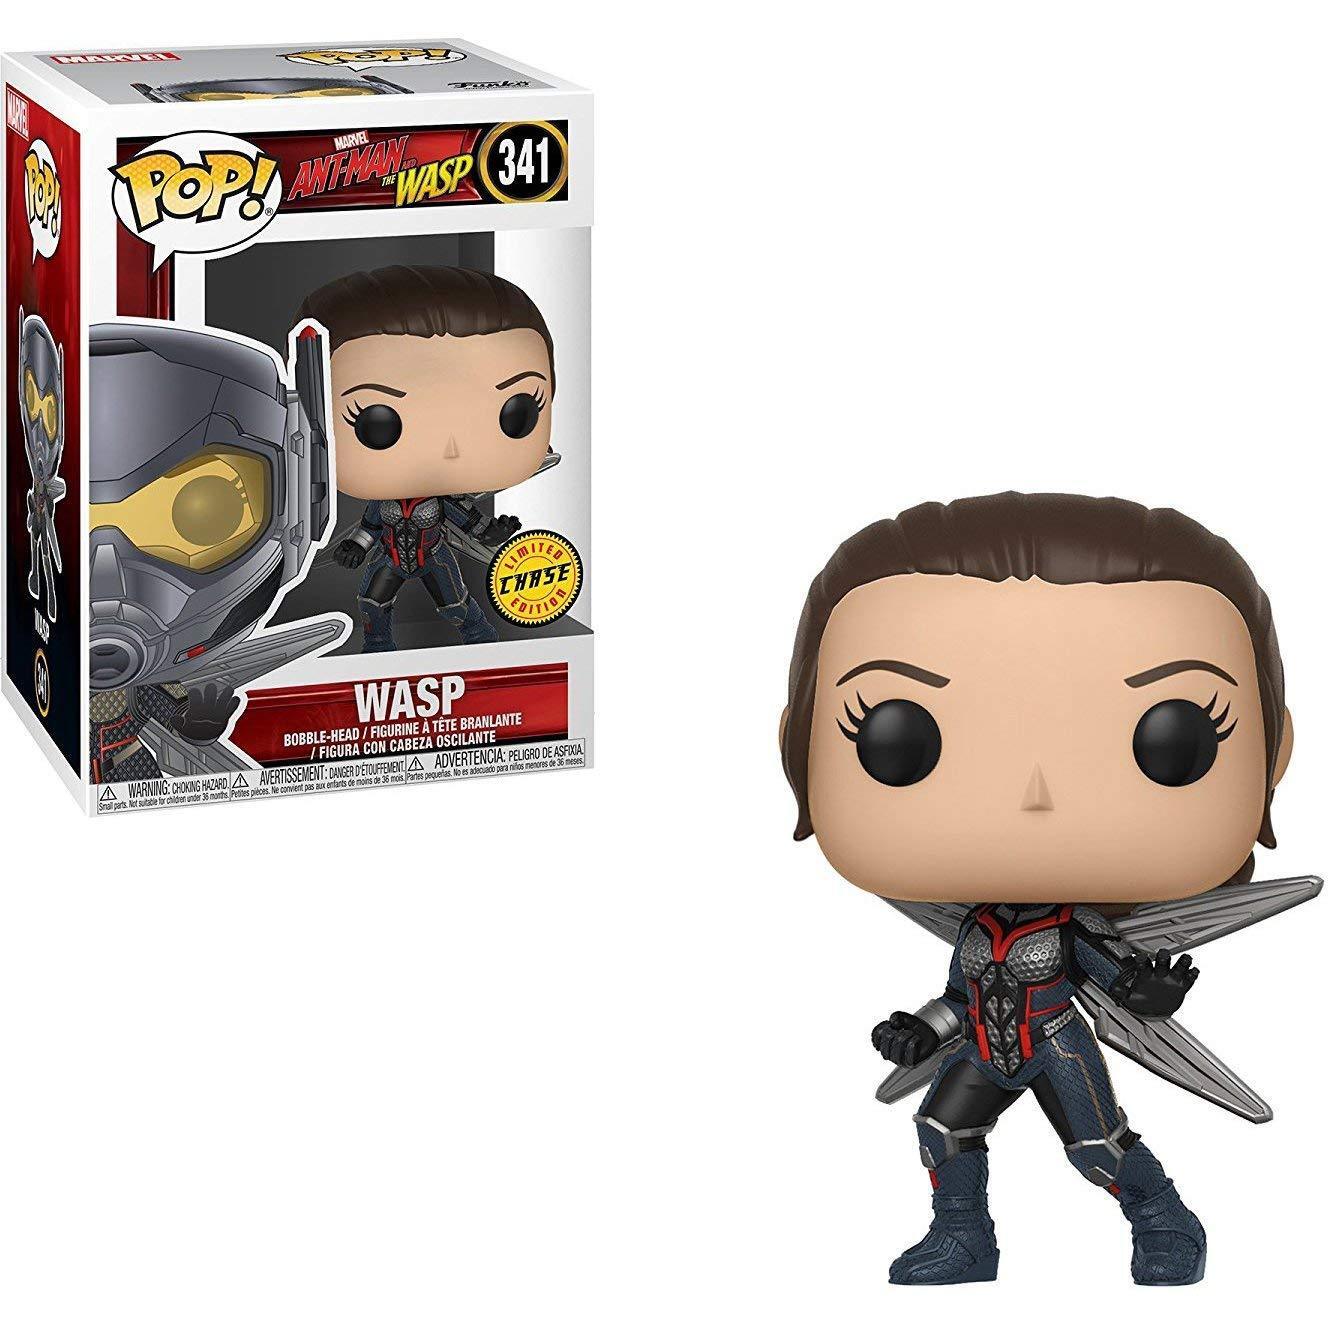 Ant Man And The Wasp 341 Pop!